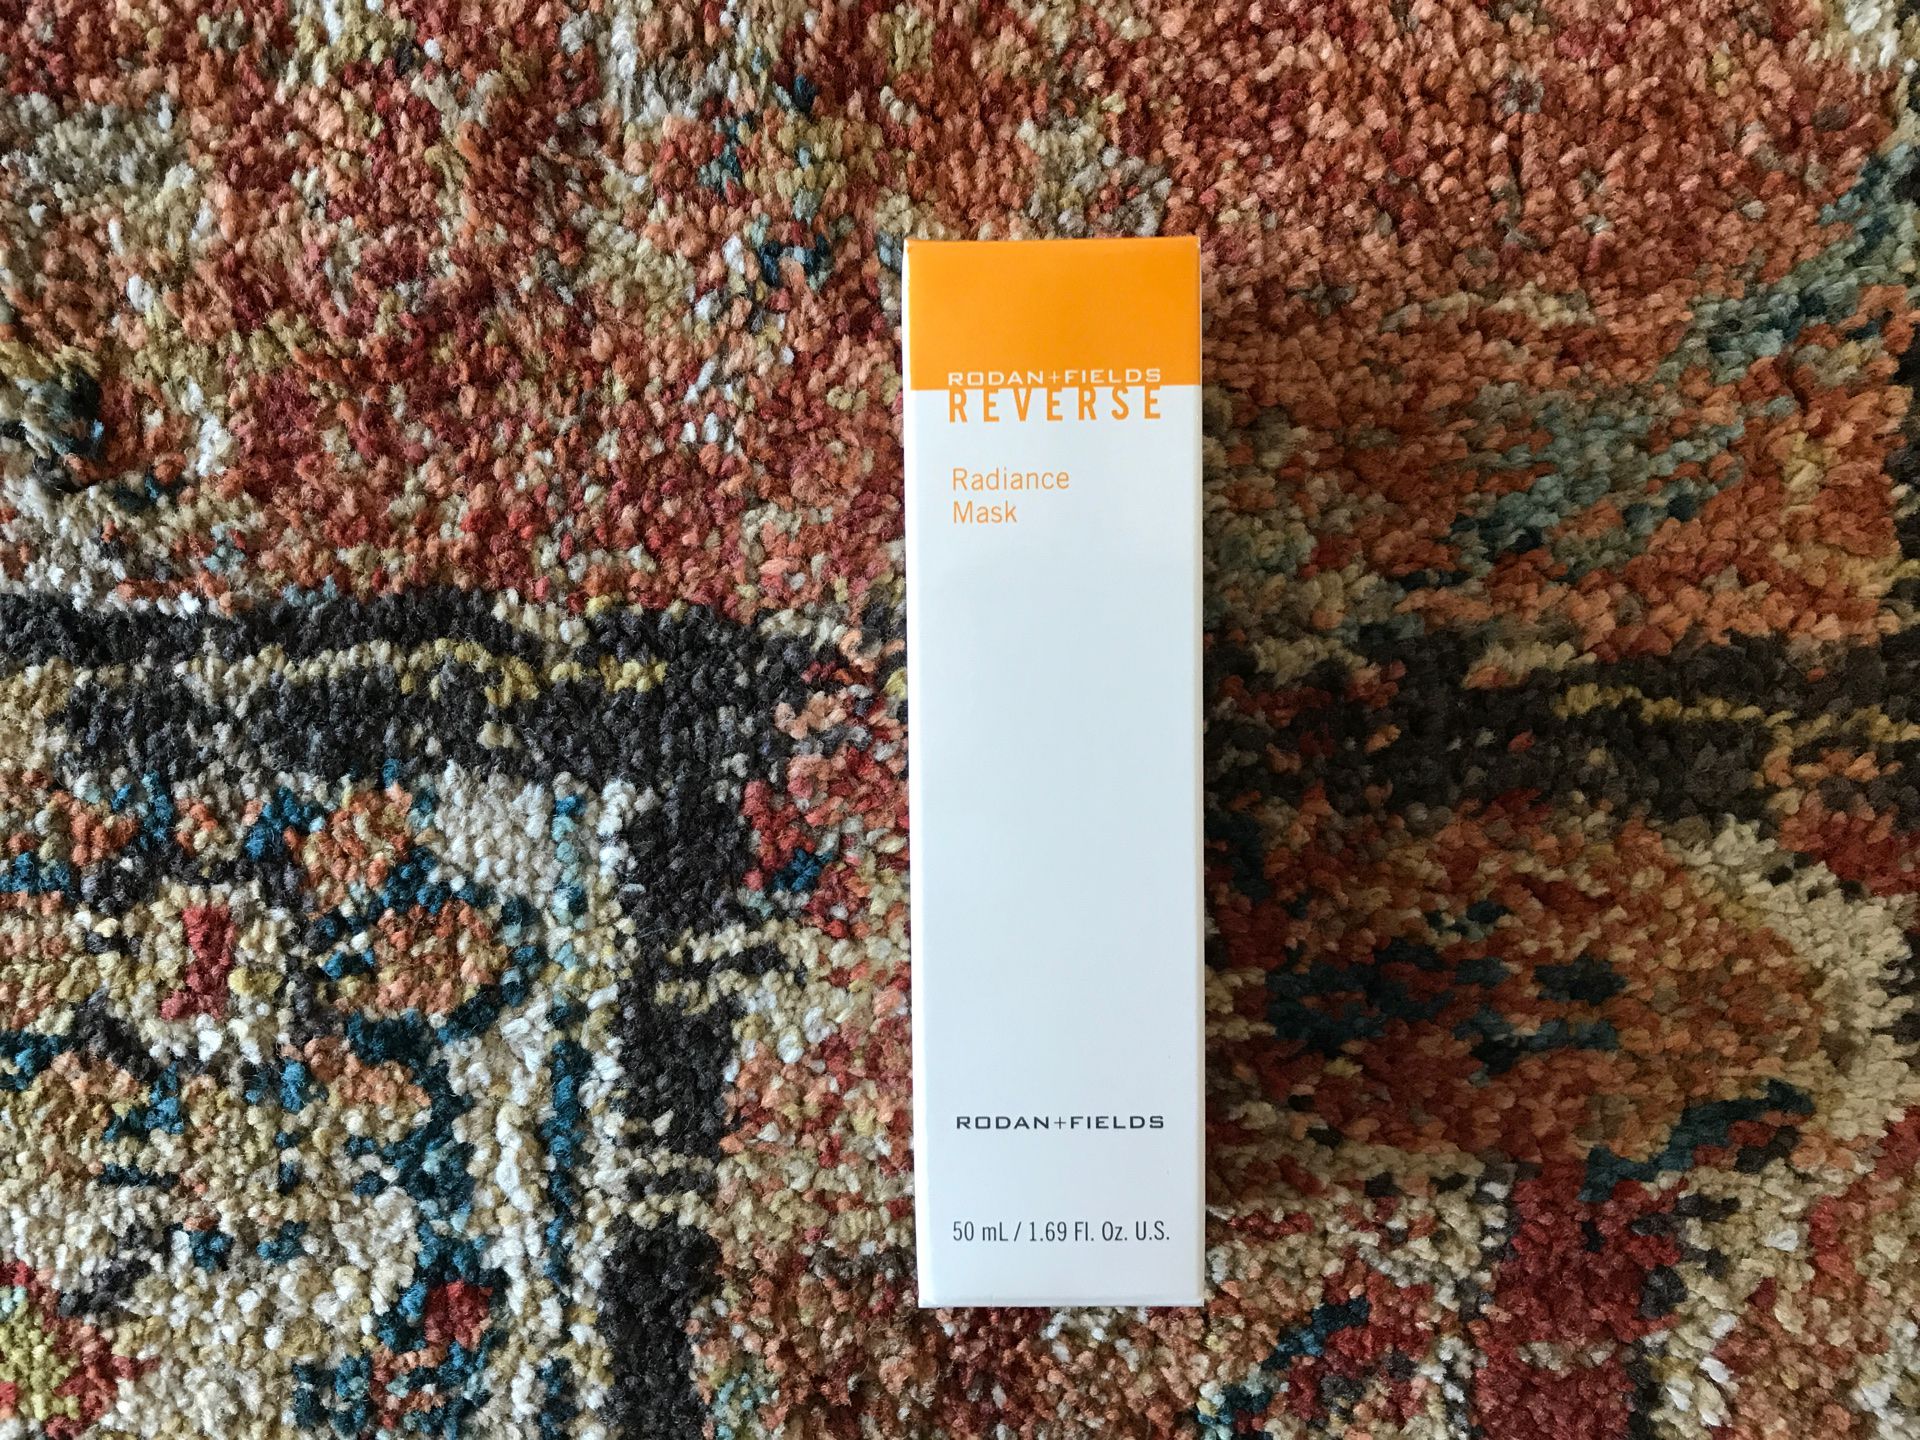 Rodan and Fields Reverse Radiance Mask (new in box and sealed)